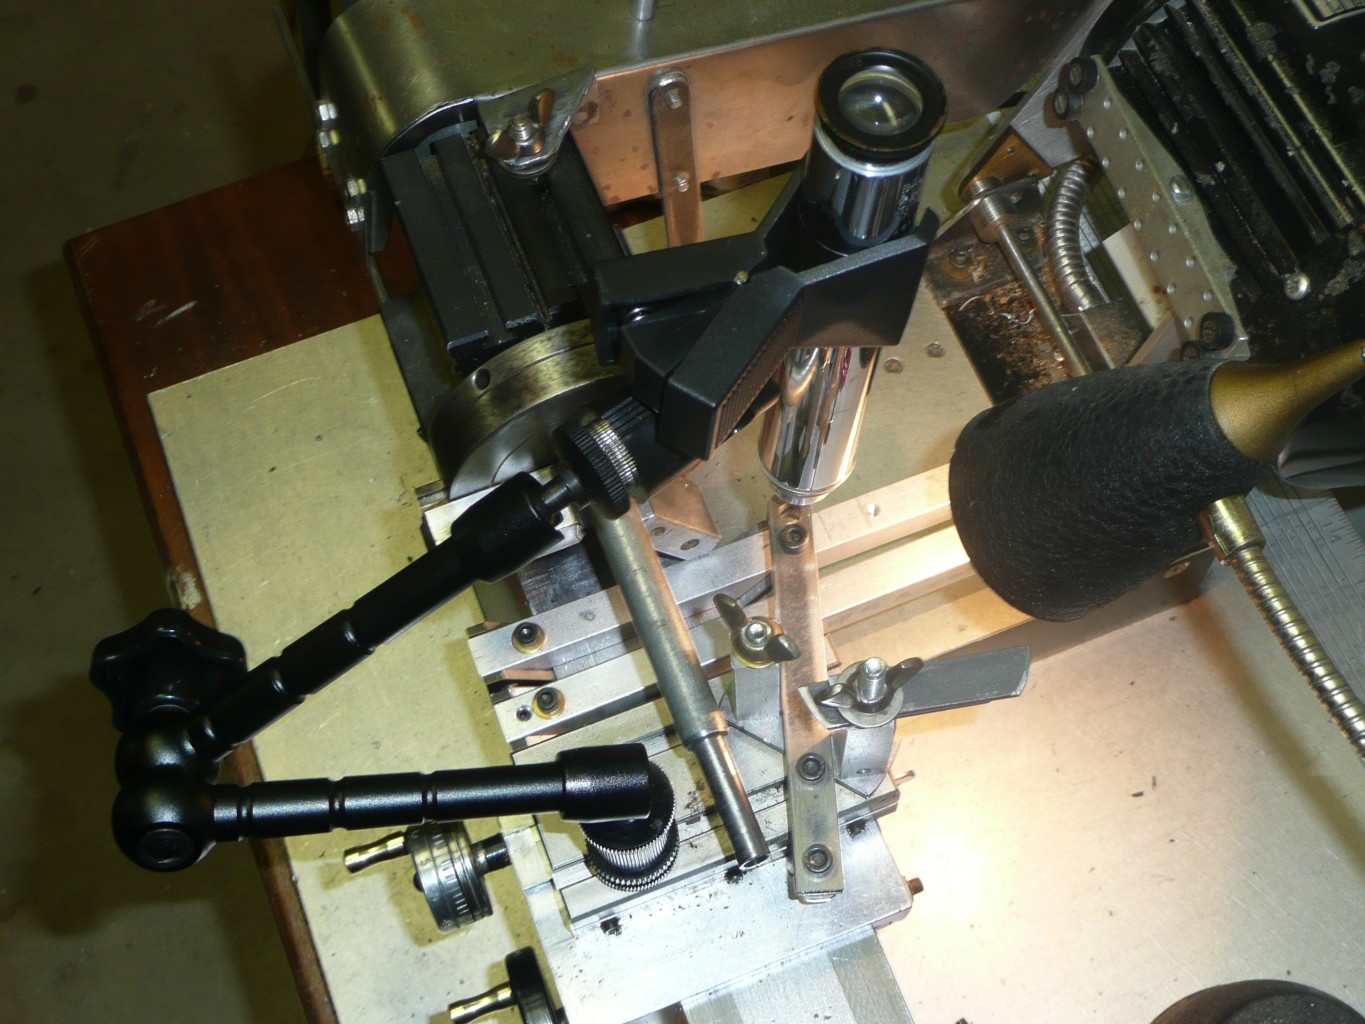 the microscope in use